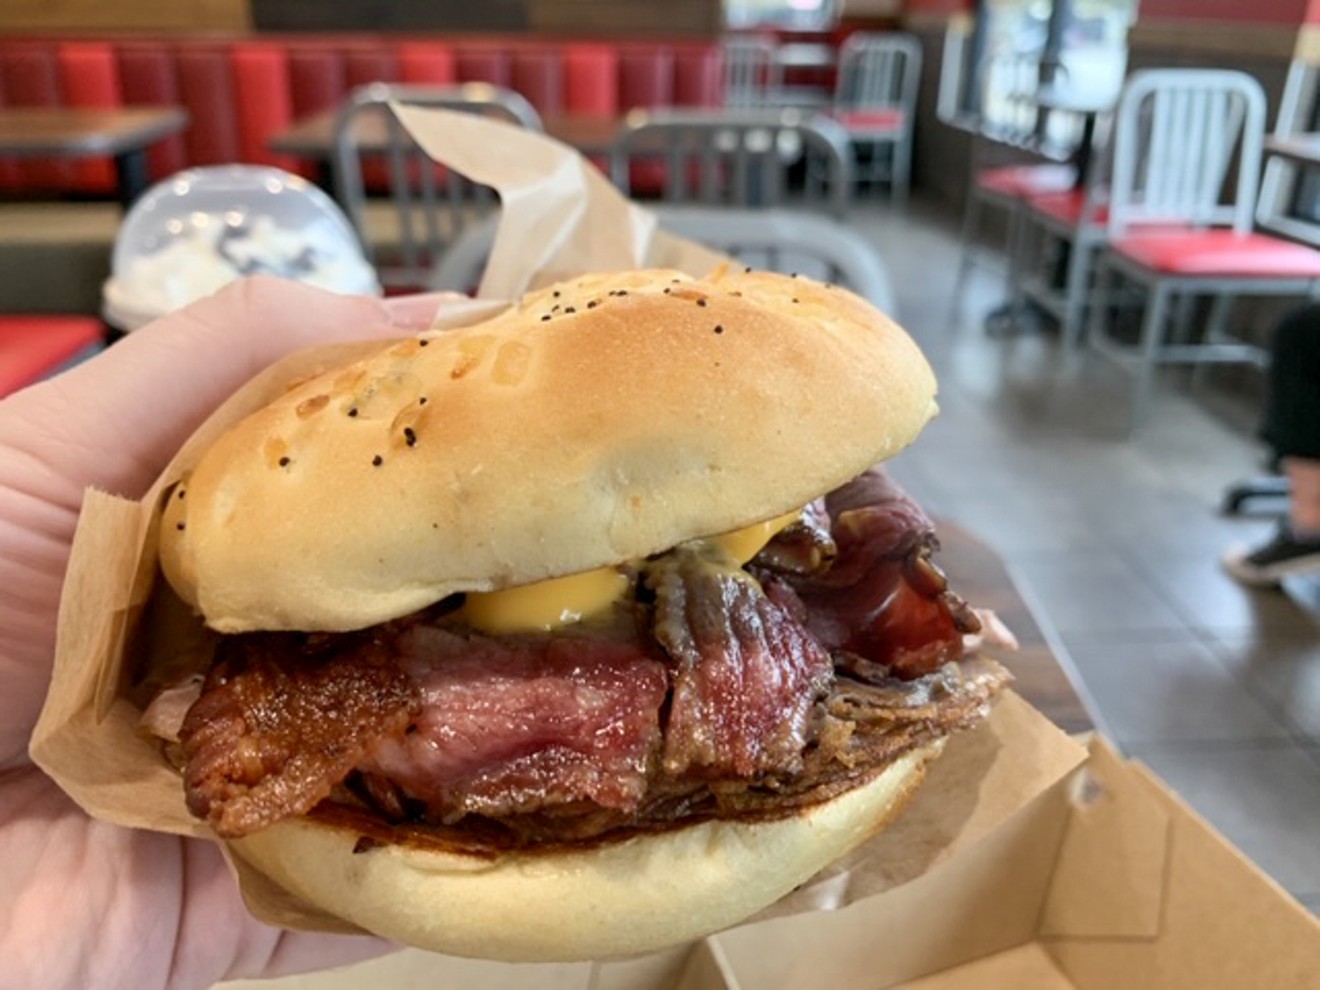 If you're seeking bacon and want it fast, Arby's is the way to go.